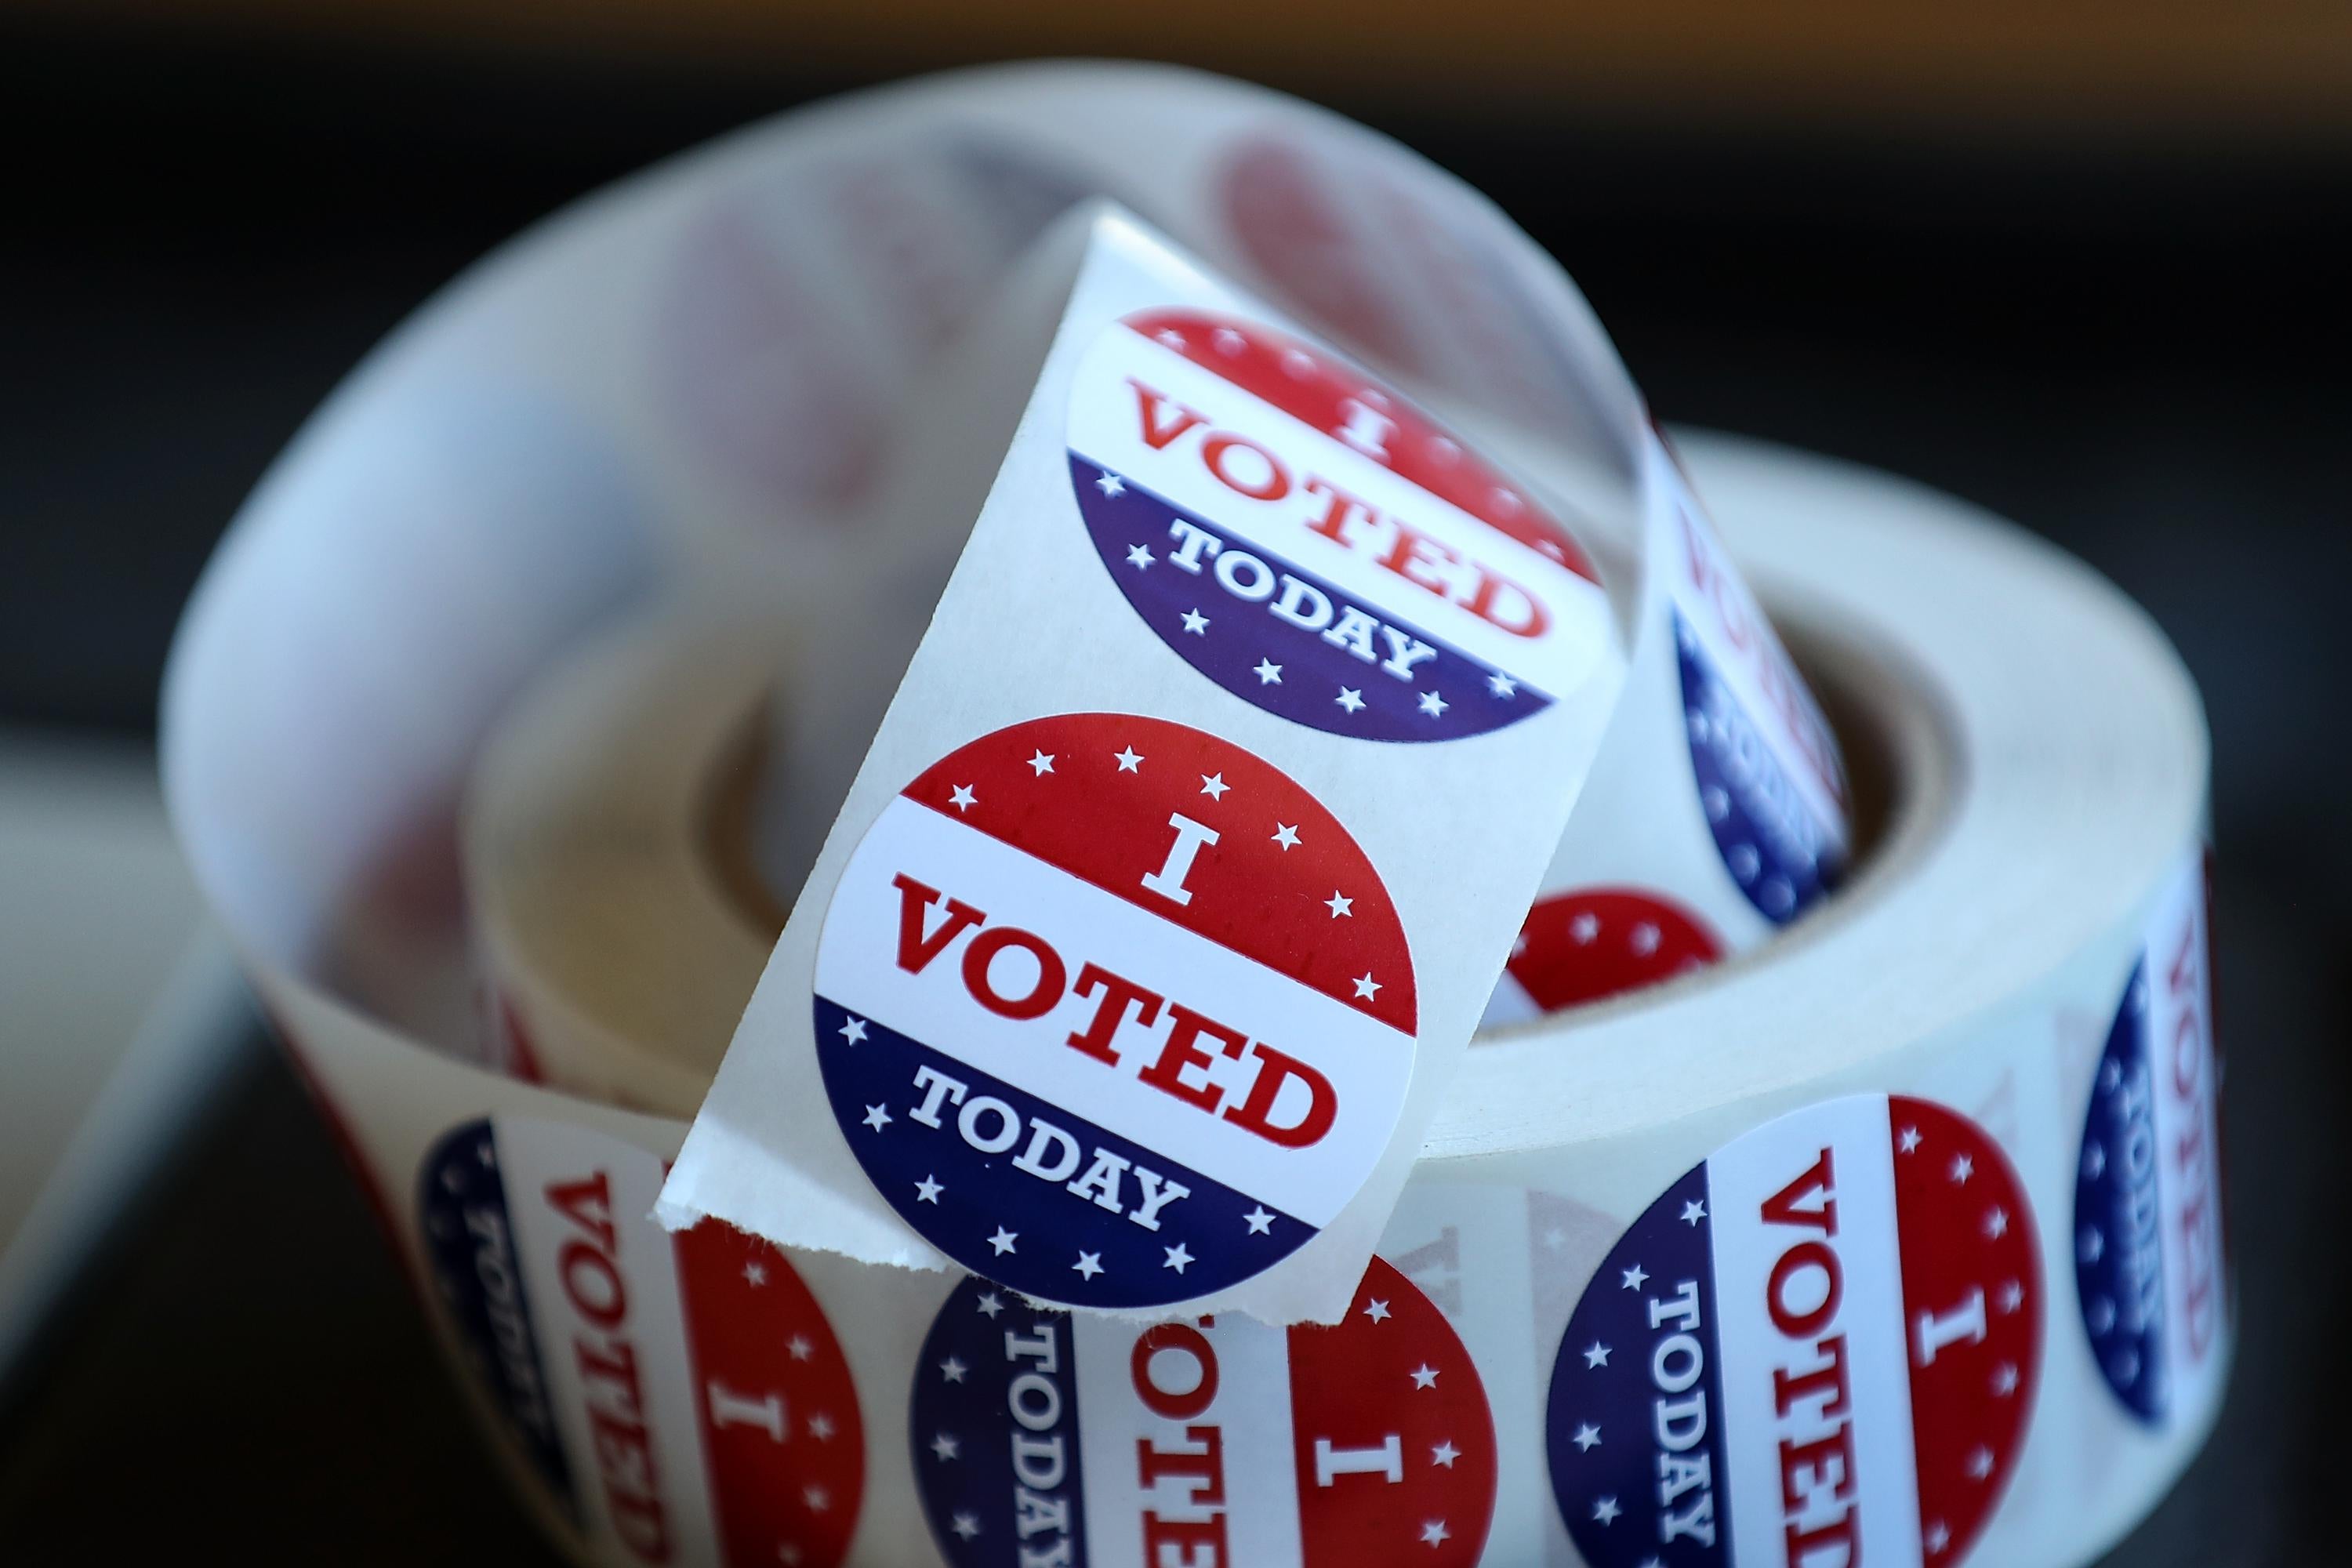 SAN ANSELMO, CA - JUNE 05:  A roll of 'I Voted' stickers sit on a table inside a polling station at a Ross Valley fire station on June 5, 2018 in San Anselmo, California. California voters are heading to the polls to vote in the primary election.  (Photo by Justin Sullivan/Getty Images)